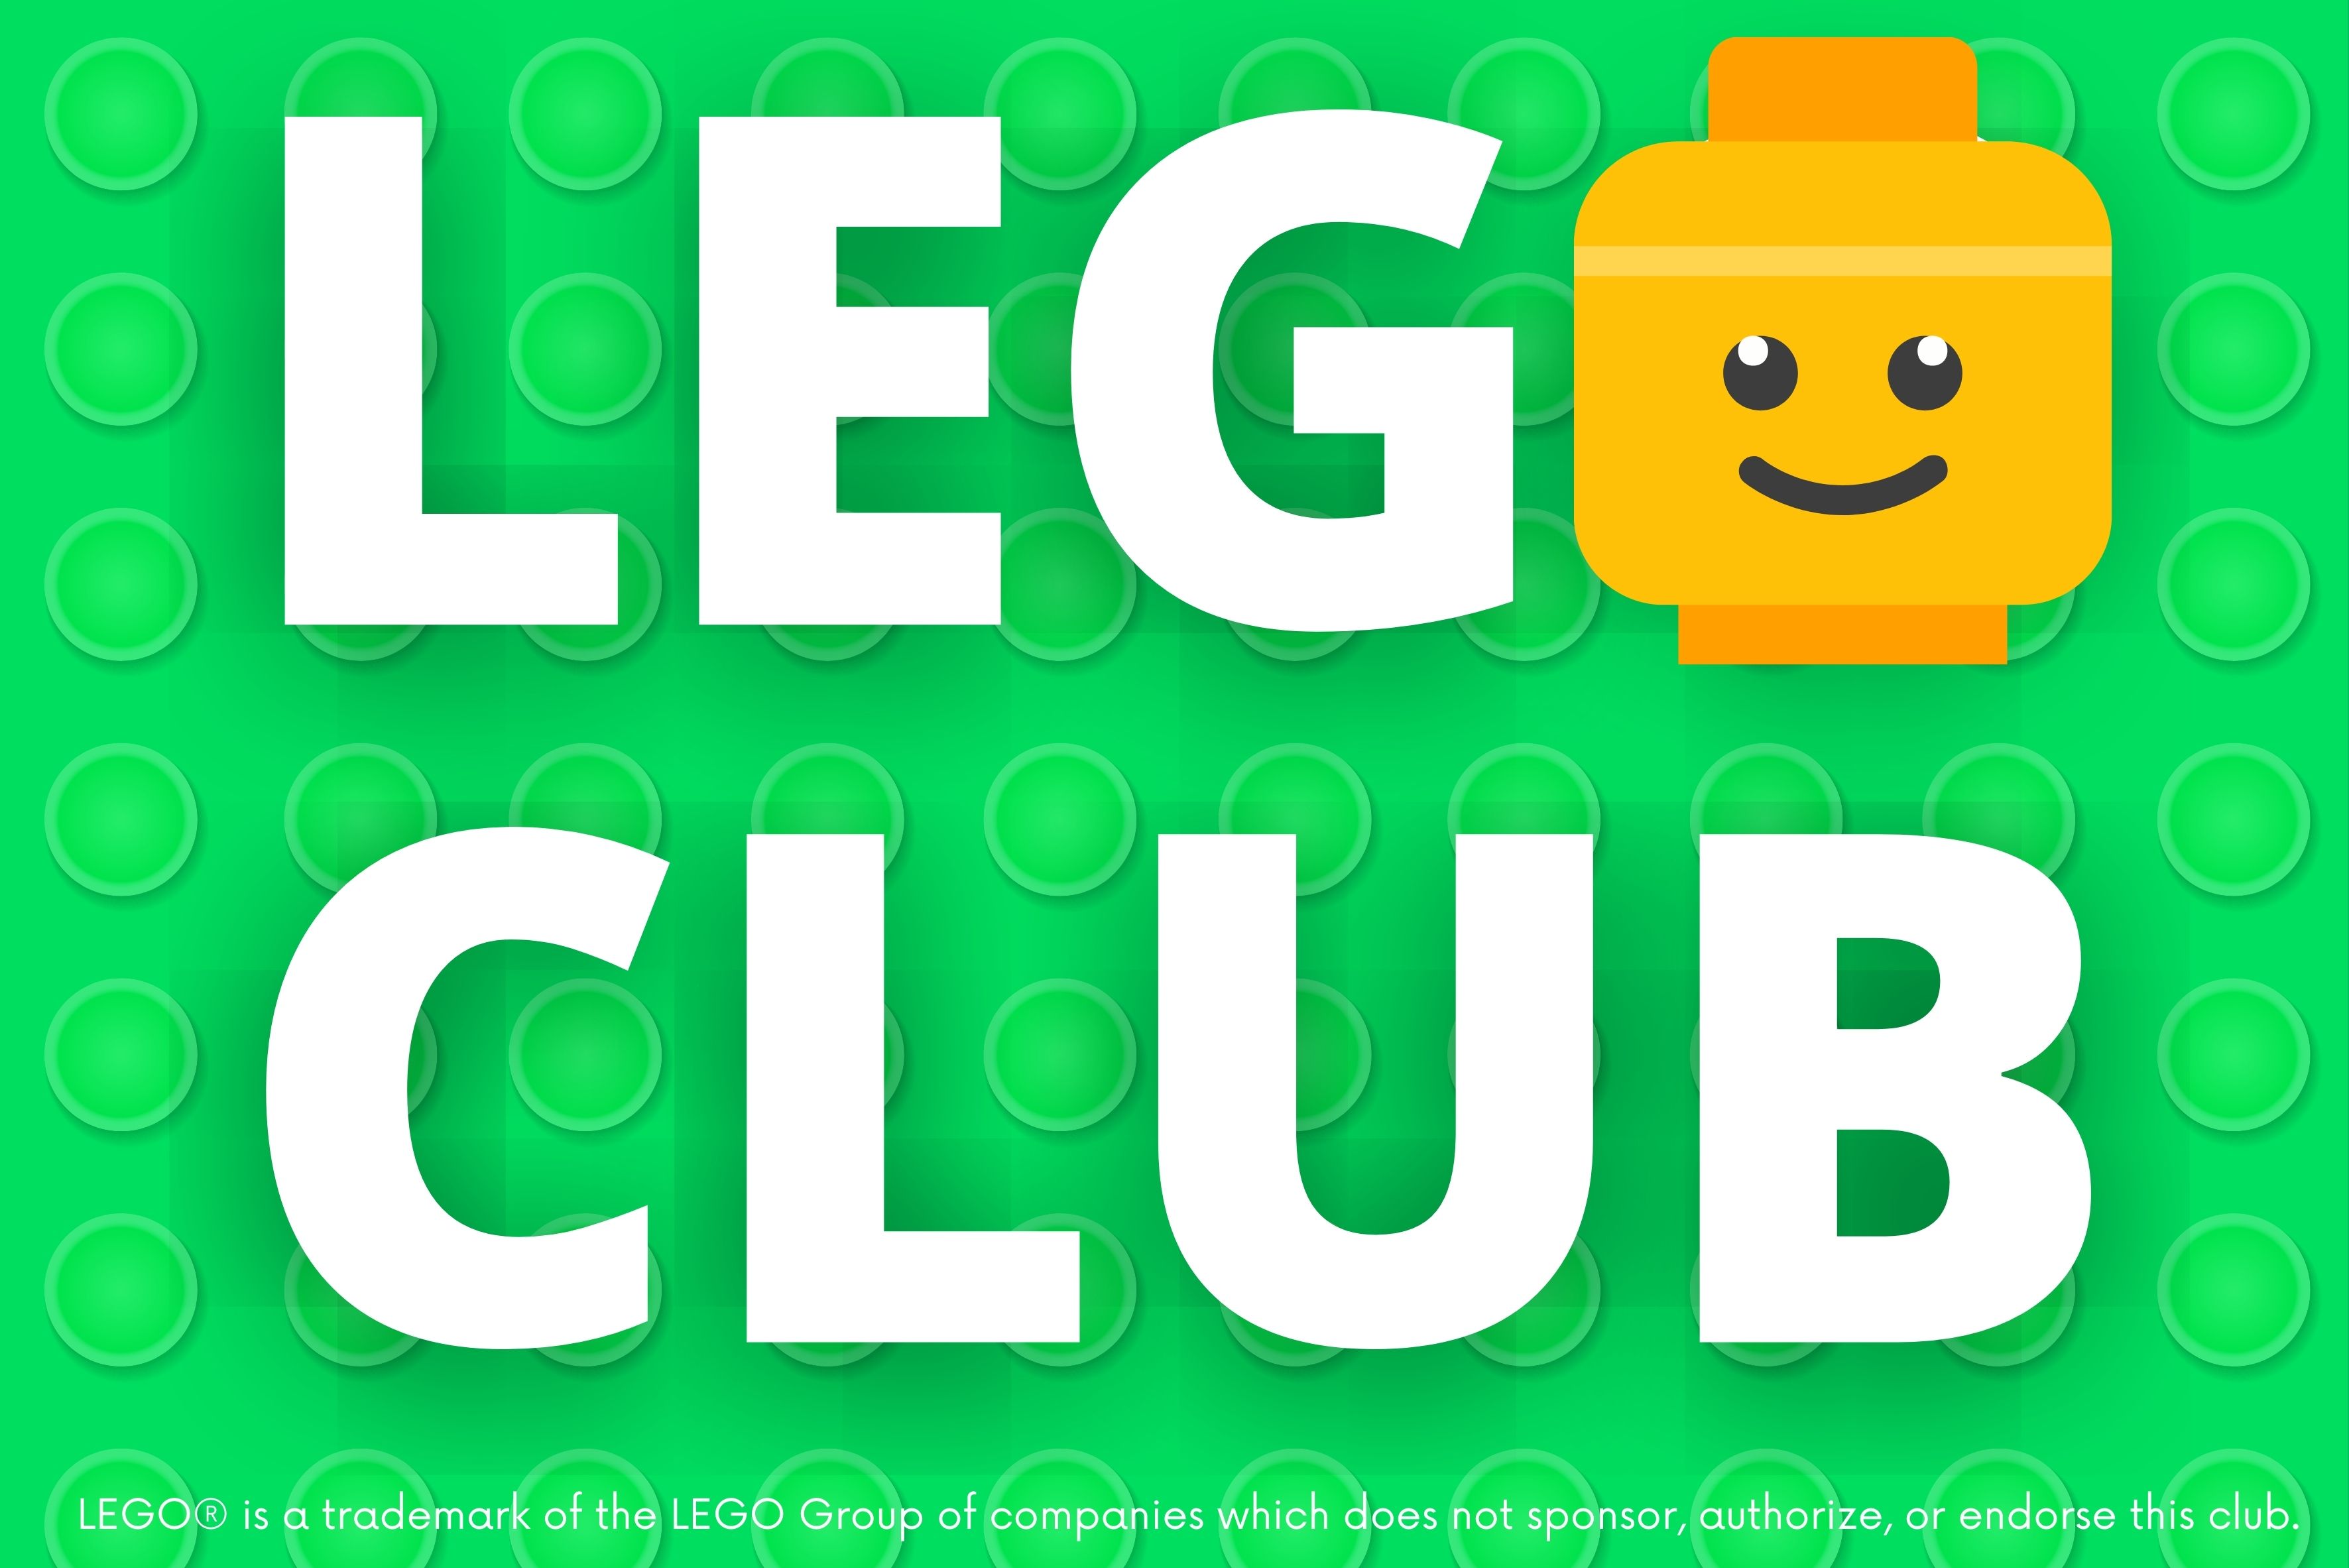 The words "Lego Club" with a Lego face as the "o"